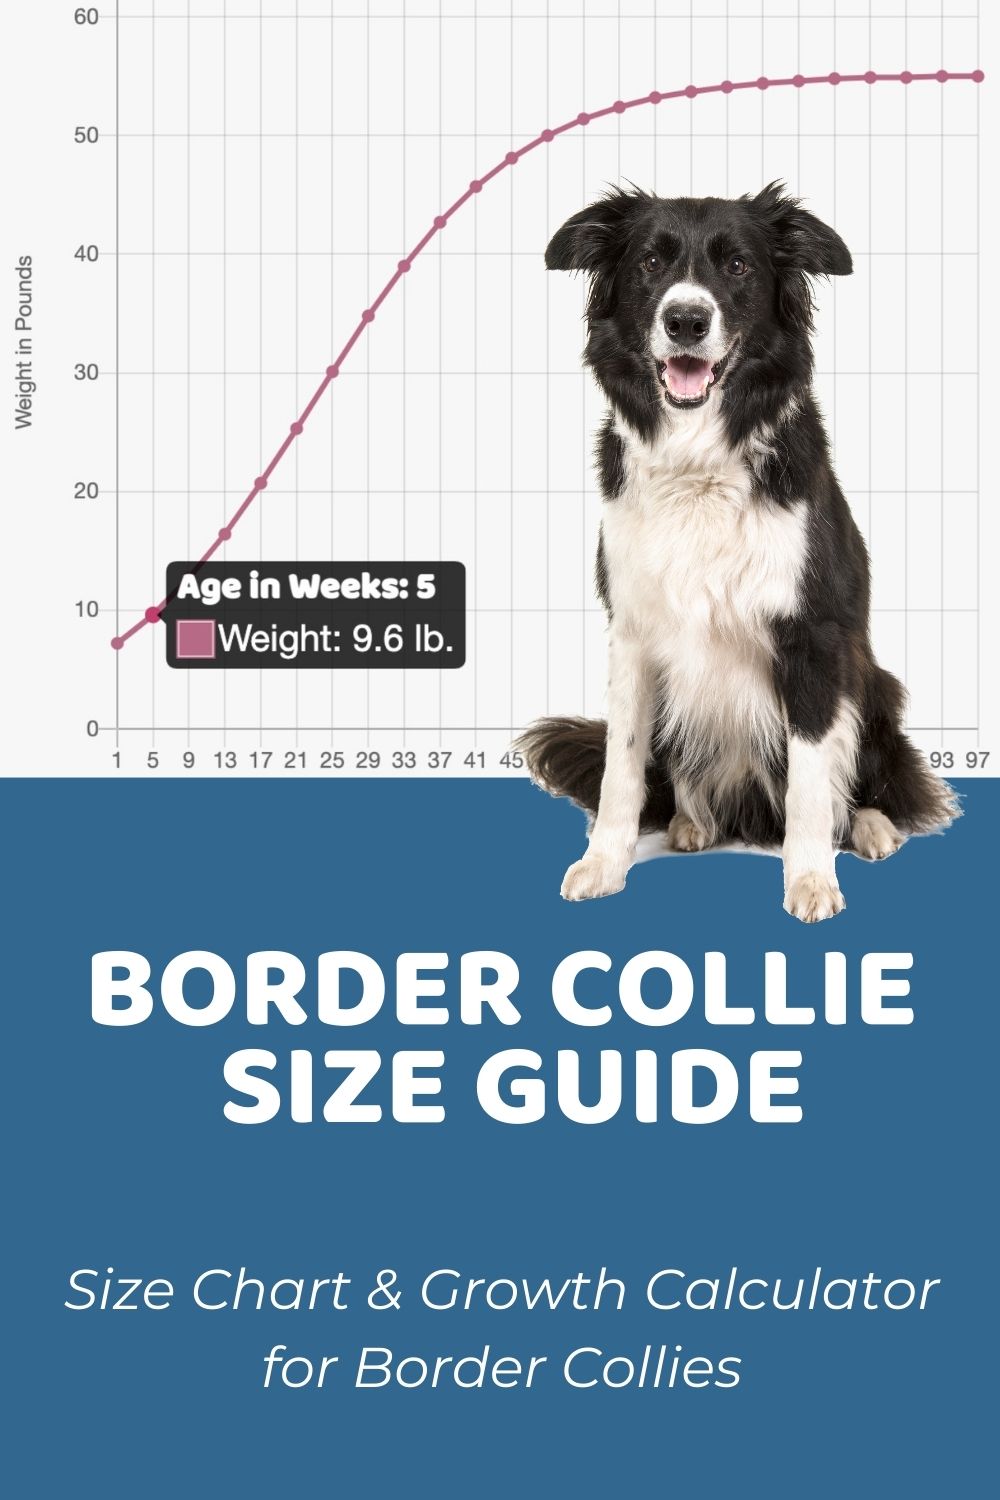 Essential Guidelines for Managing Your Border Collies Weight